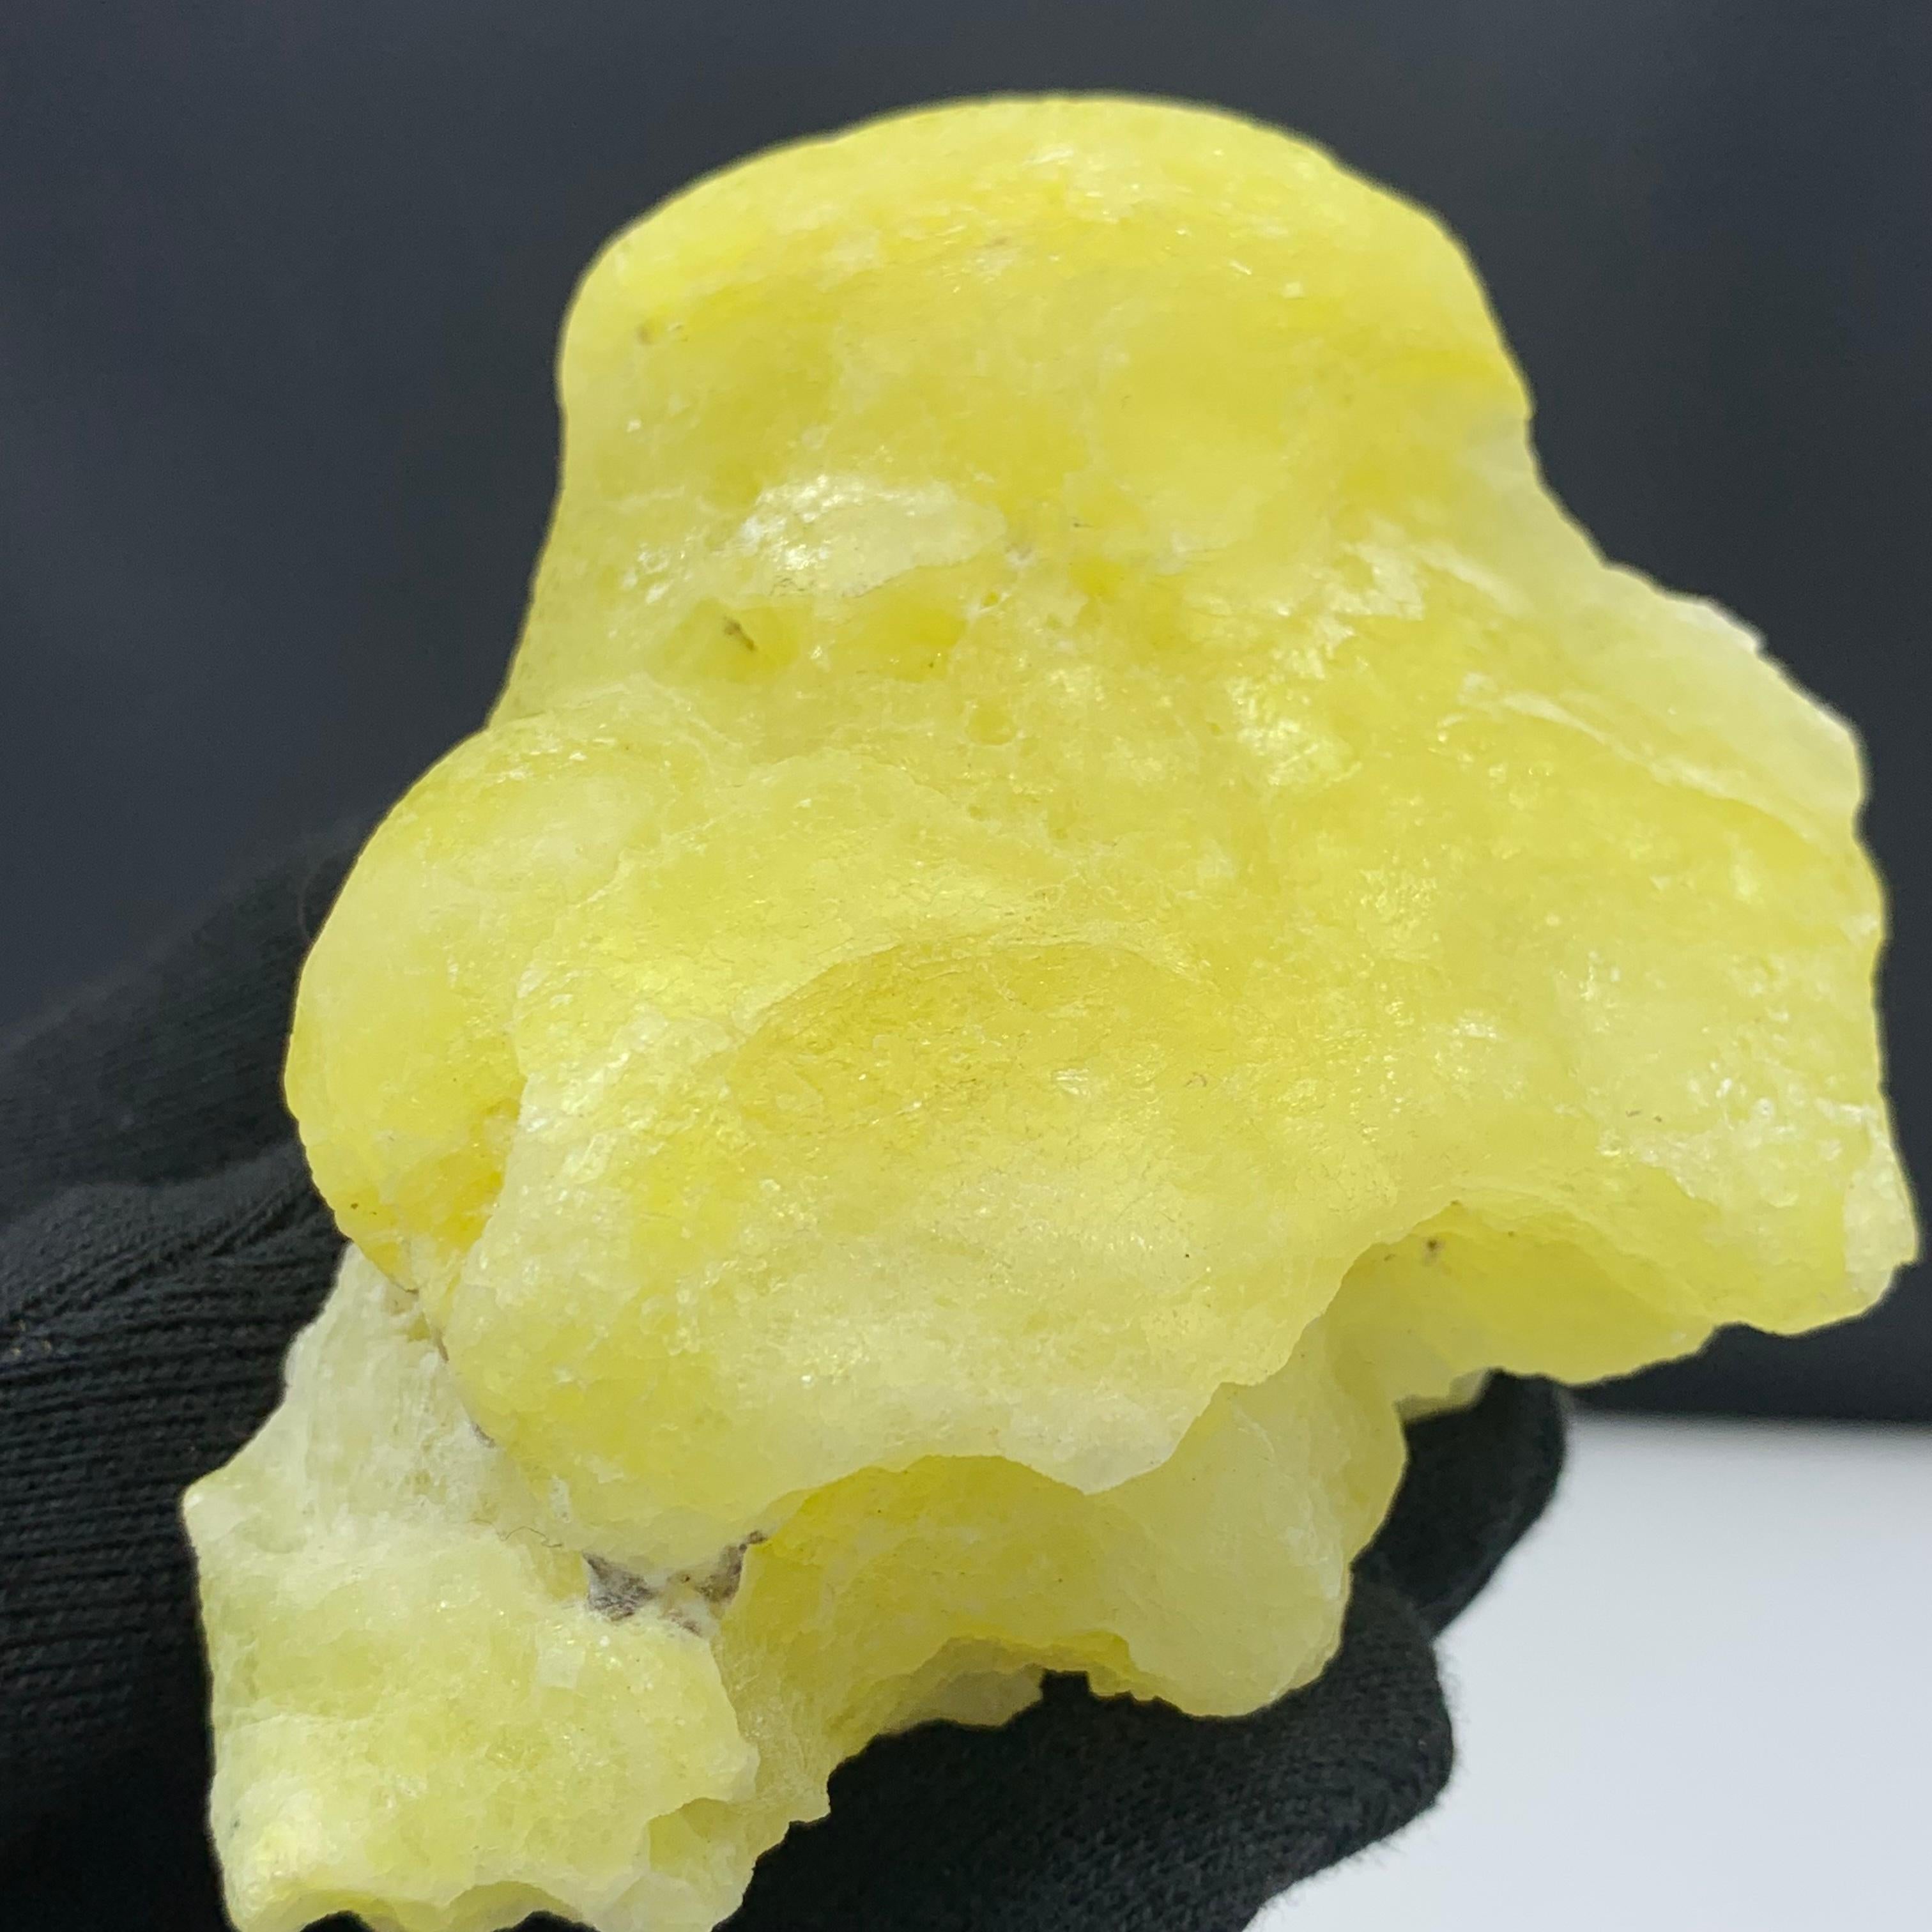 Pakistani 173 Gram Adorable Lemon Yellow Brucite In Botryoidal Rounded Habit From Pakistan For Sale